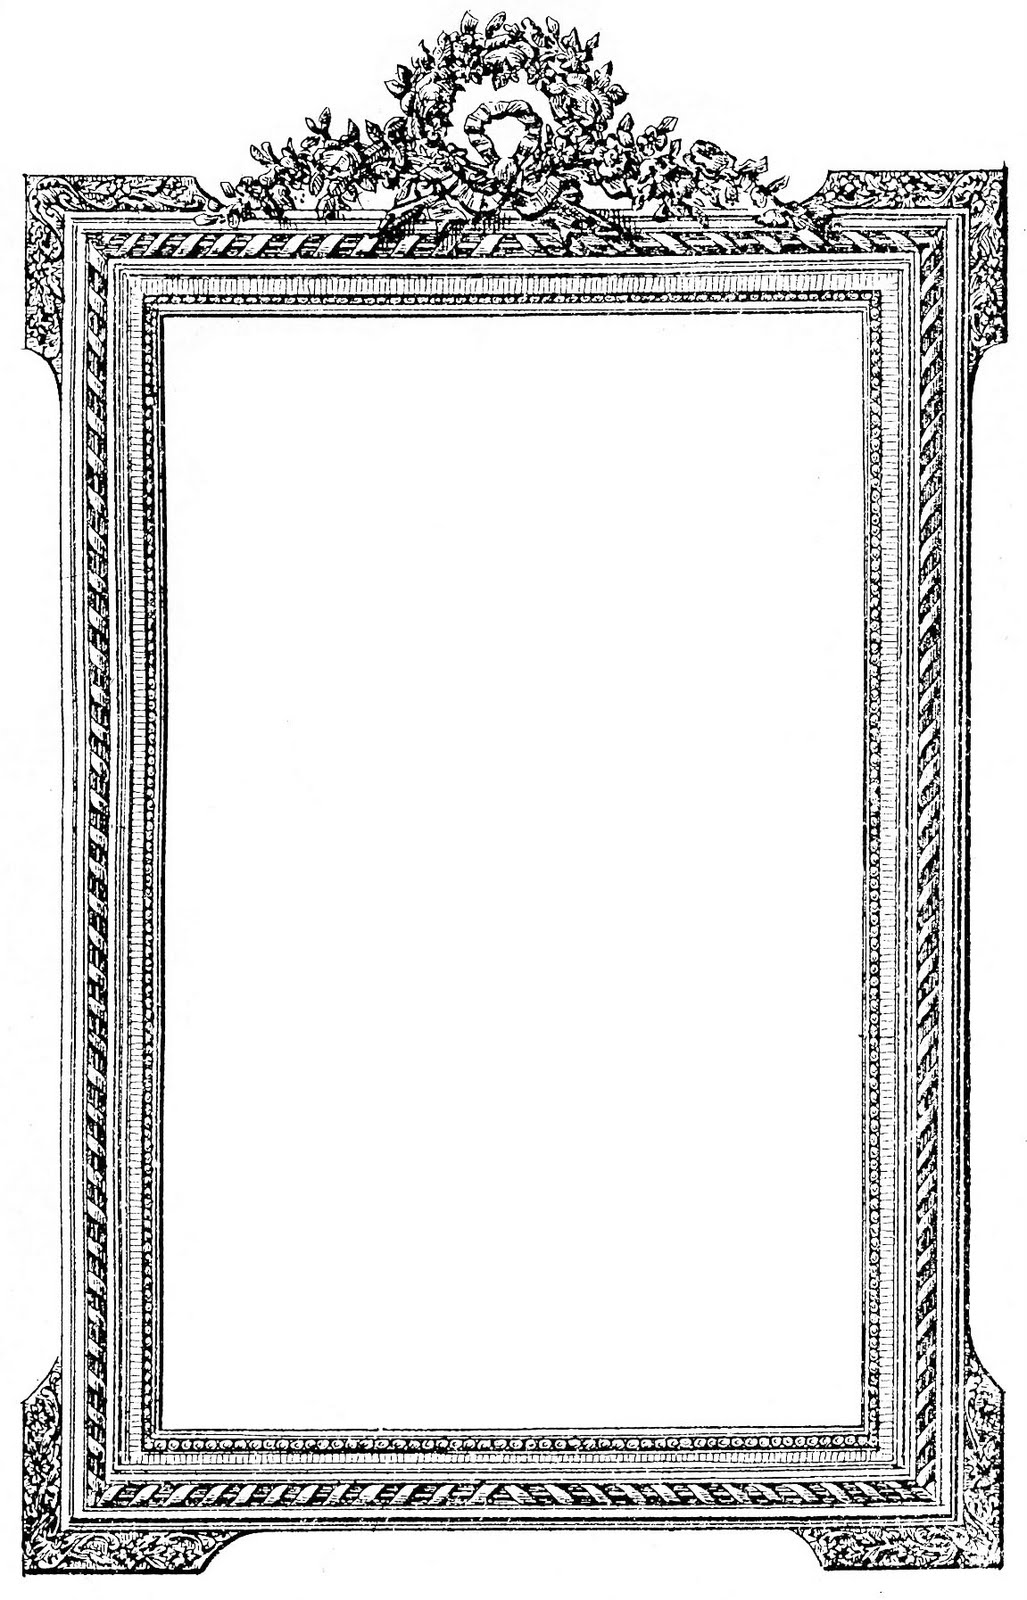 Blank Picture Frame Clip Art 